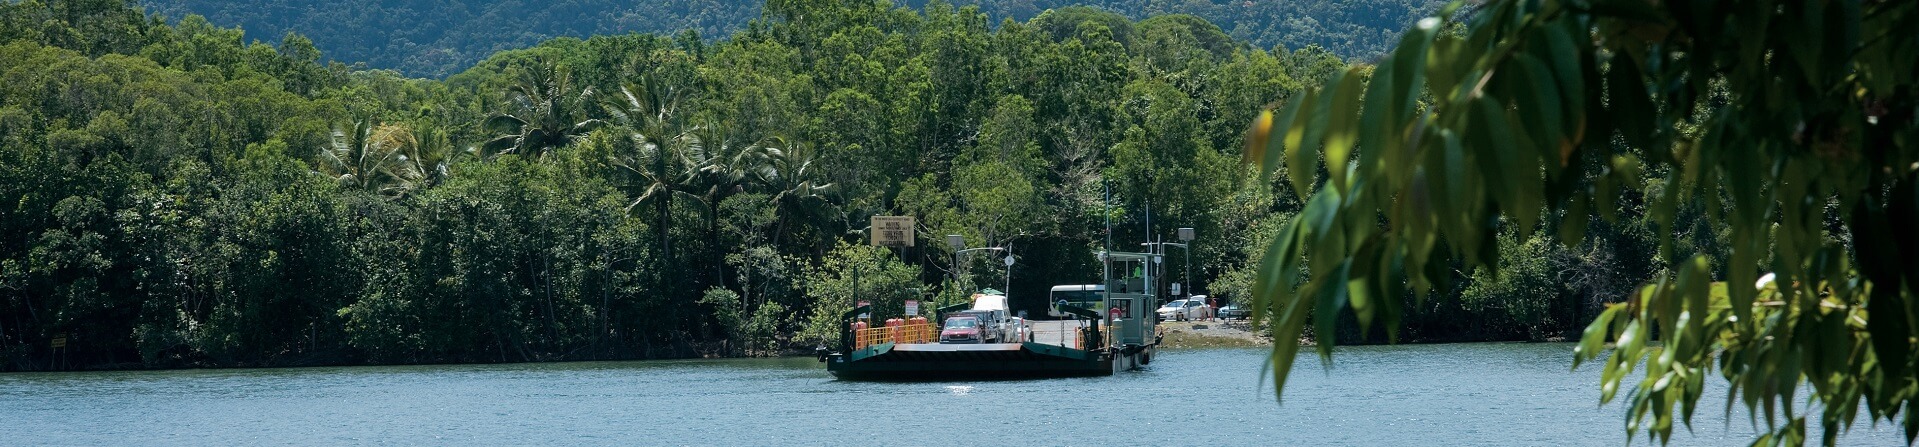 Do you have to catch a ferry to Cape Tribulation?